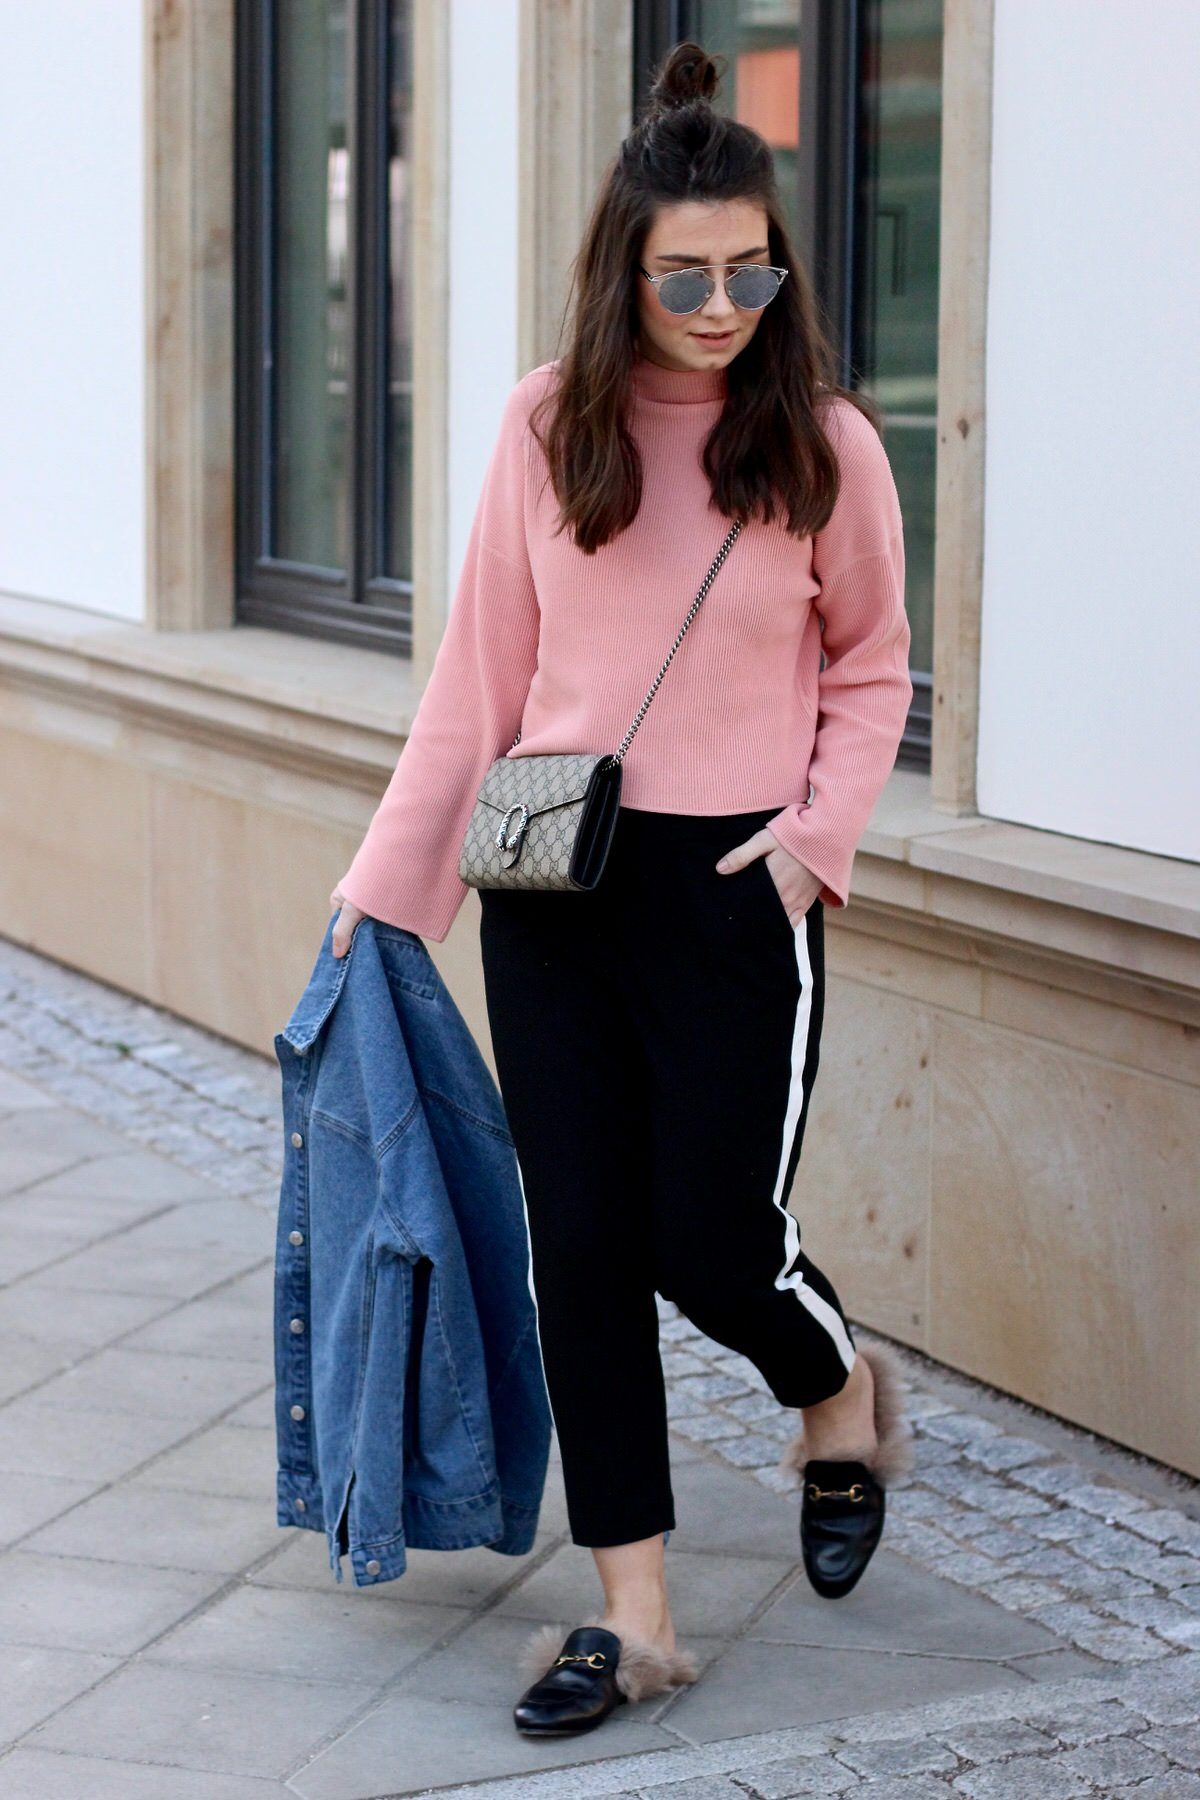 Gucci Princetown Slipper, Gucci Dionysus Mini, Dior Sonnenbrille, Zara Chinohose, Edited Jeansjacke & Pullover, pink, Streetstyle, Sommer